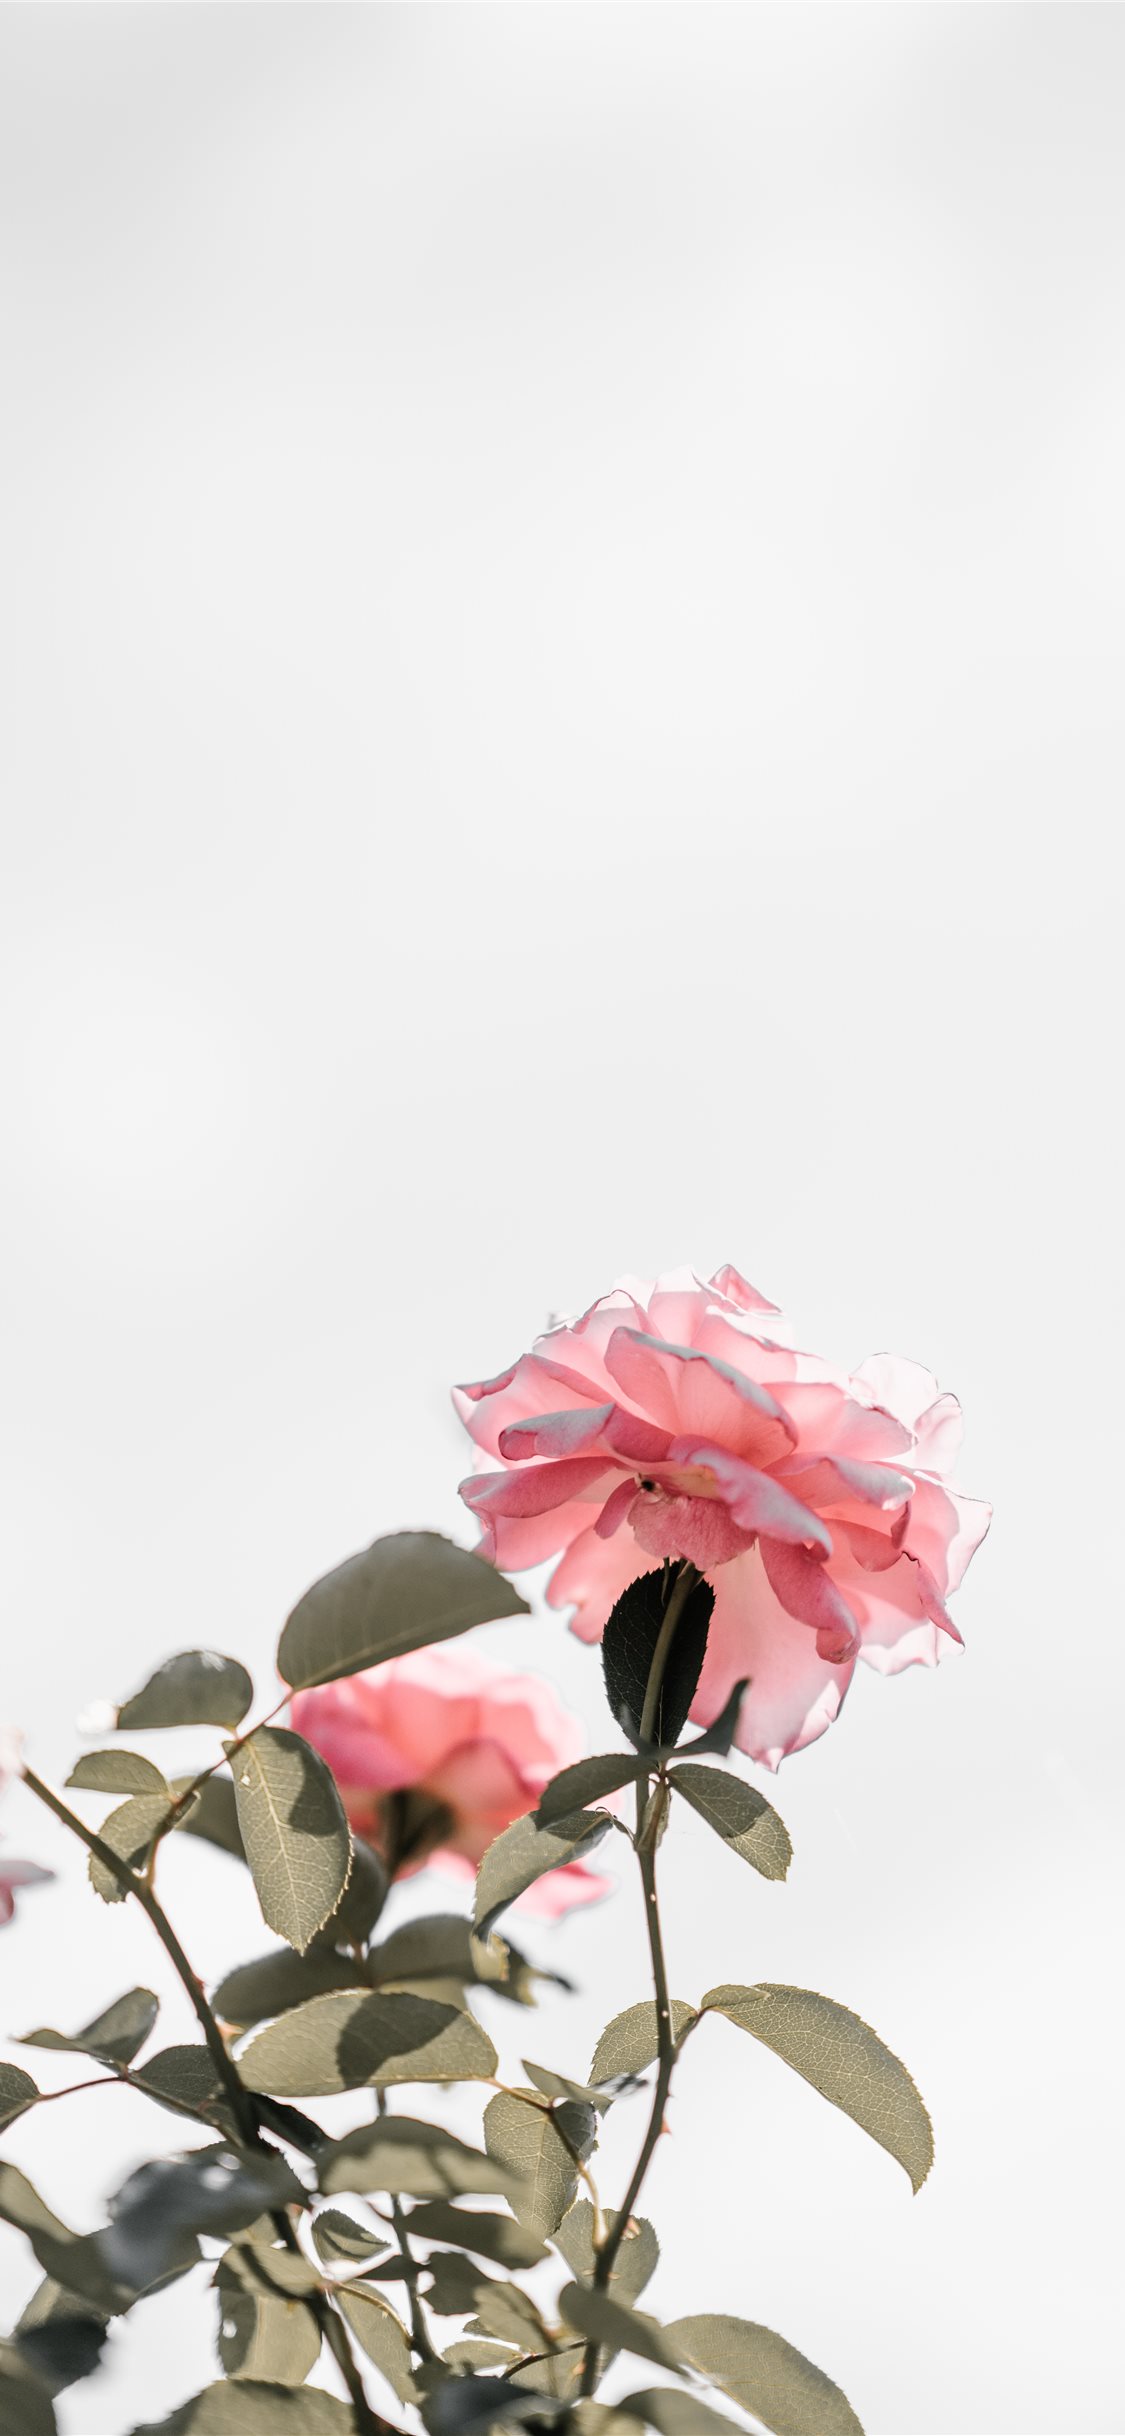 Pink Roses With Blank Space Light iPhone X Wallpaper